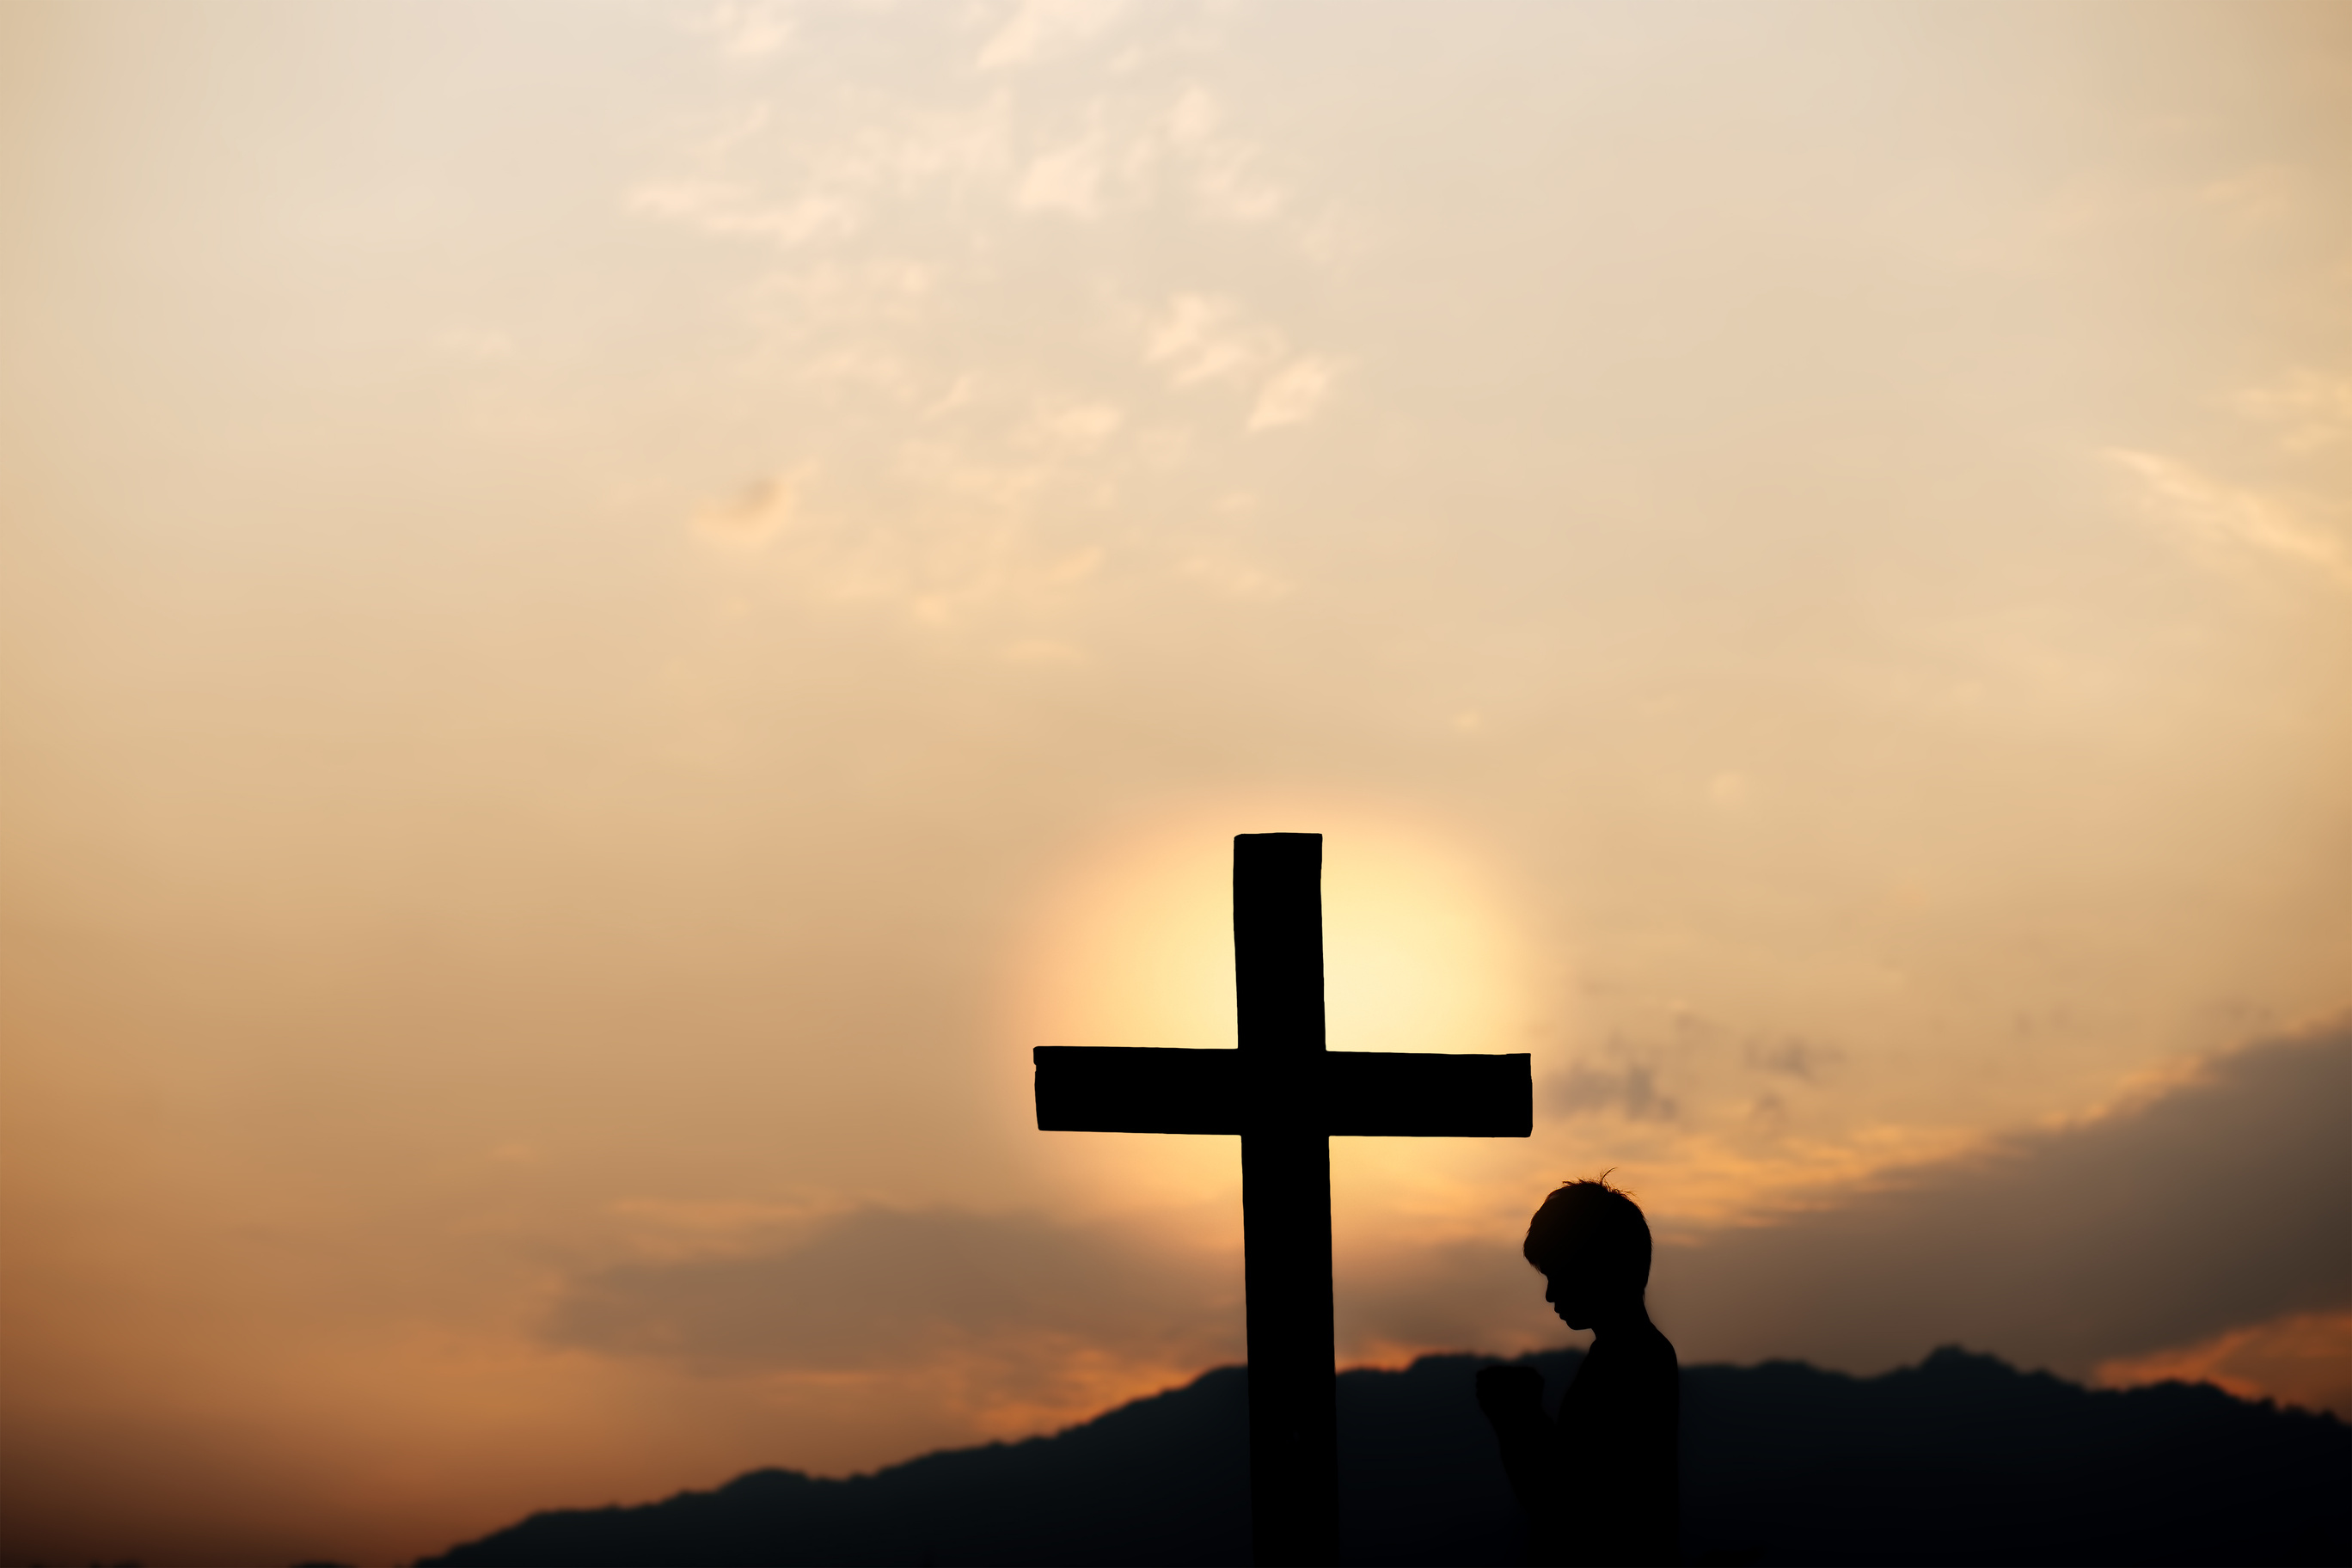 Silhouette of a man prayer in front of cross on mountain at